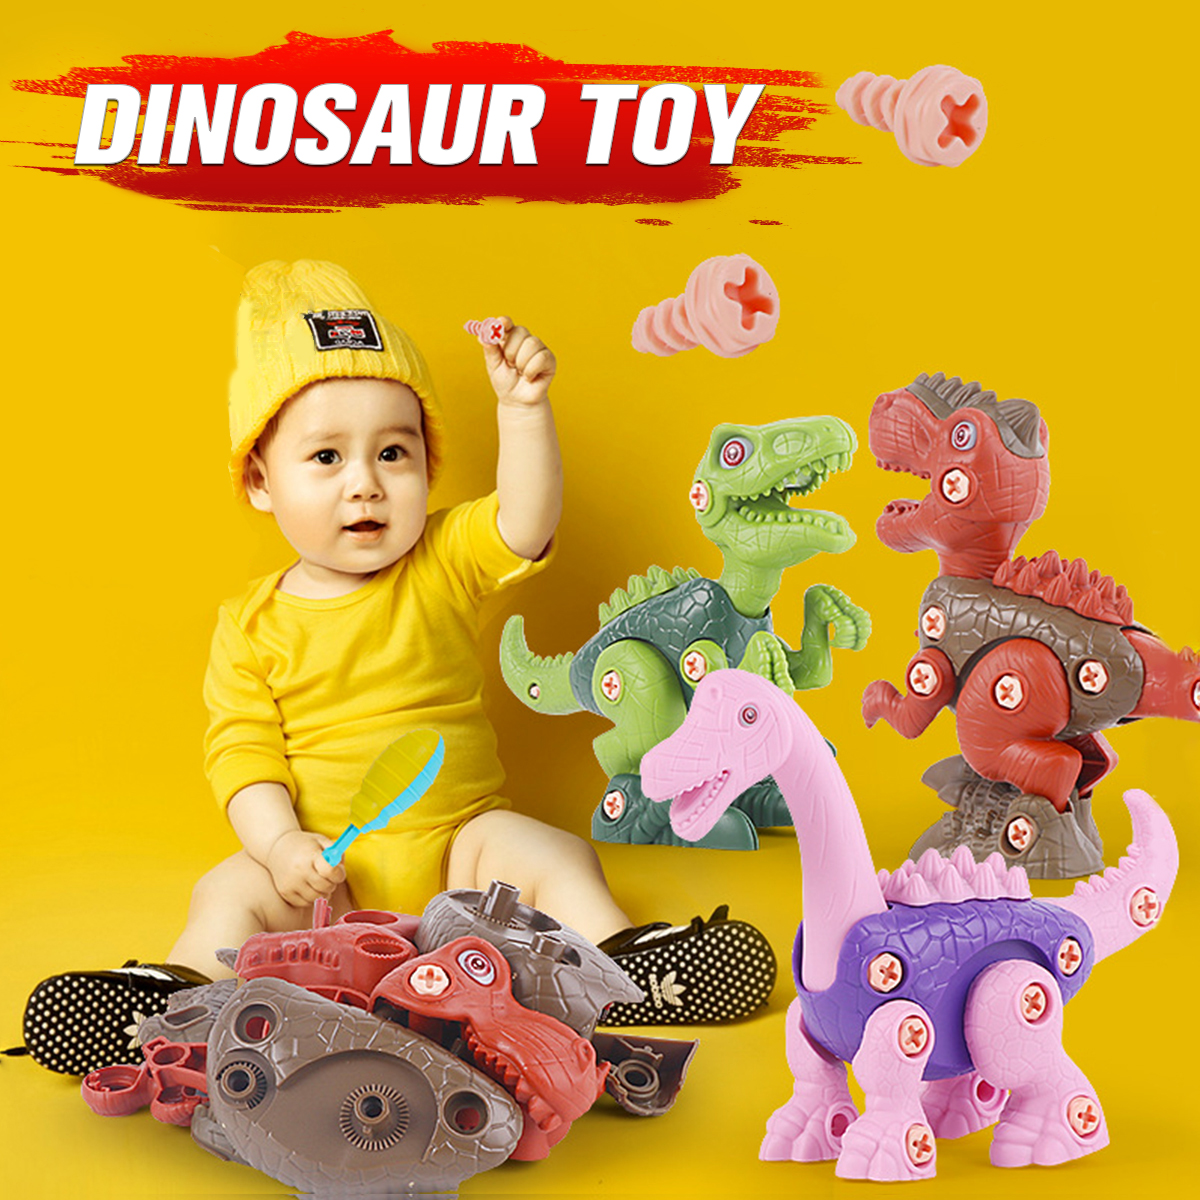 Realistic-Dinosaur-Model-Dino-Toy-Electric-Drill-Toy-Figures-Play-Set-Kids-Birthday-Christmas-Gifts-1784870-1